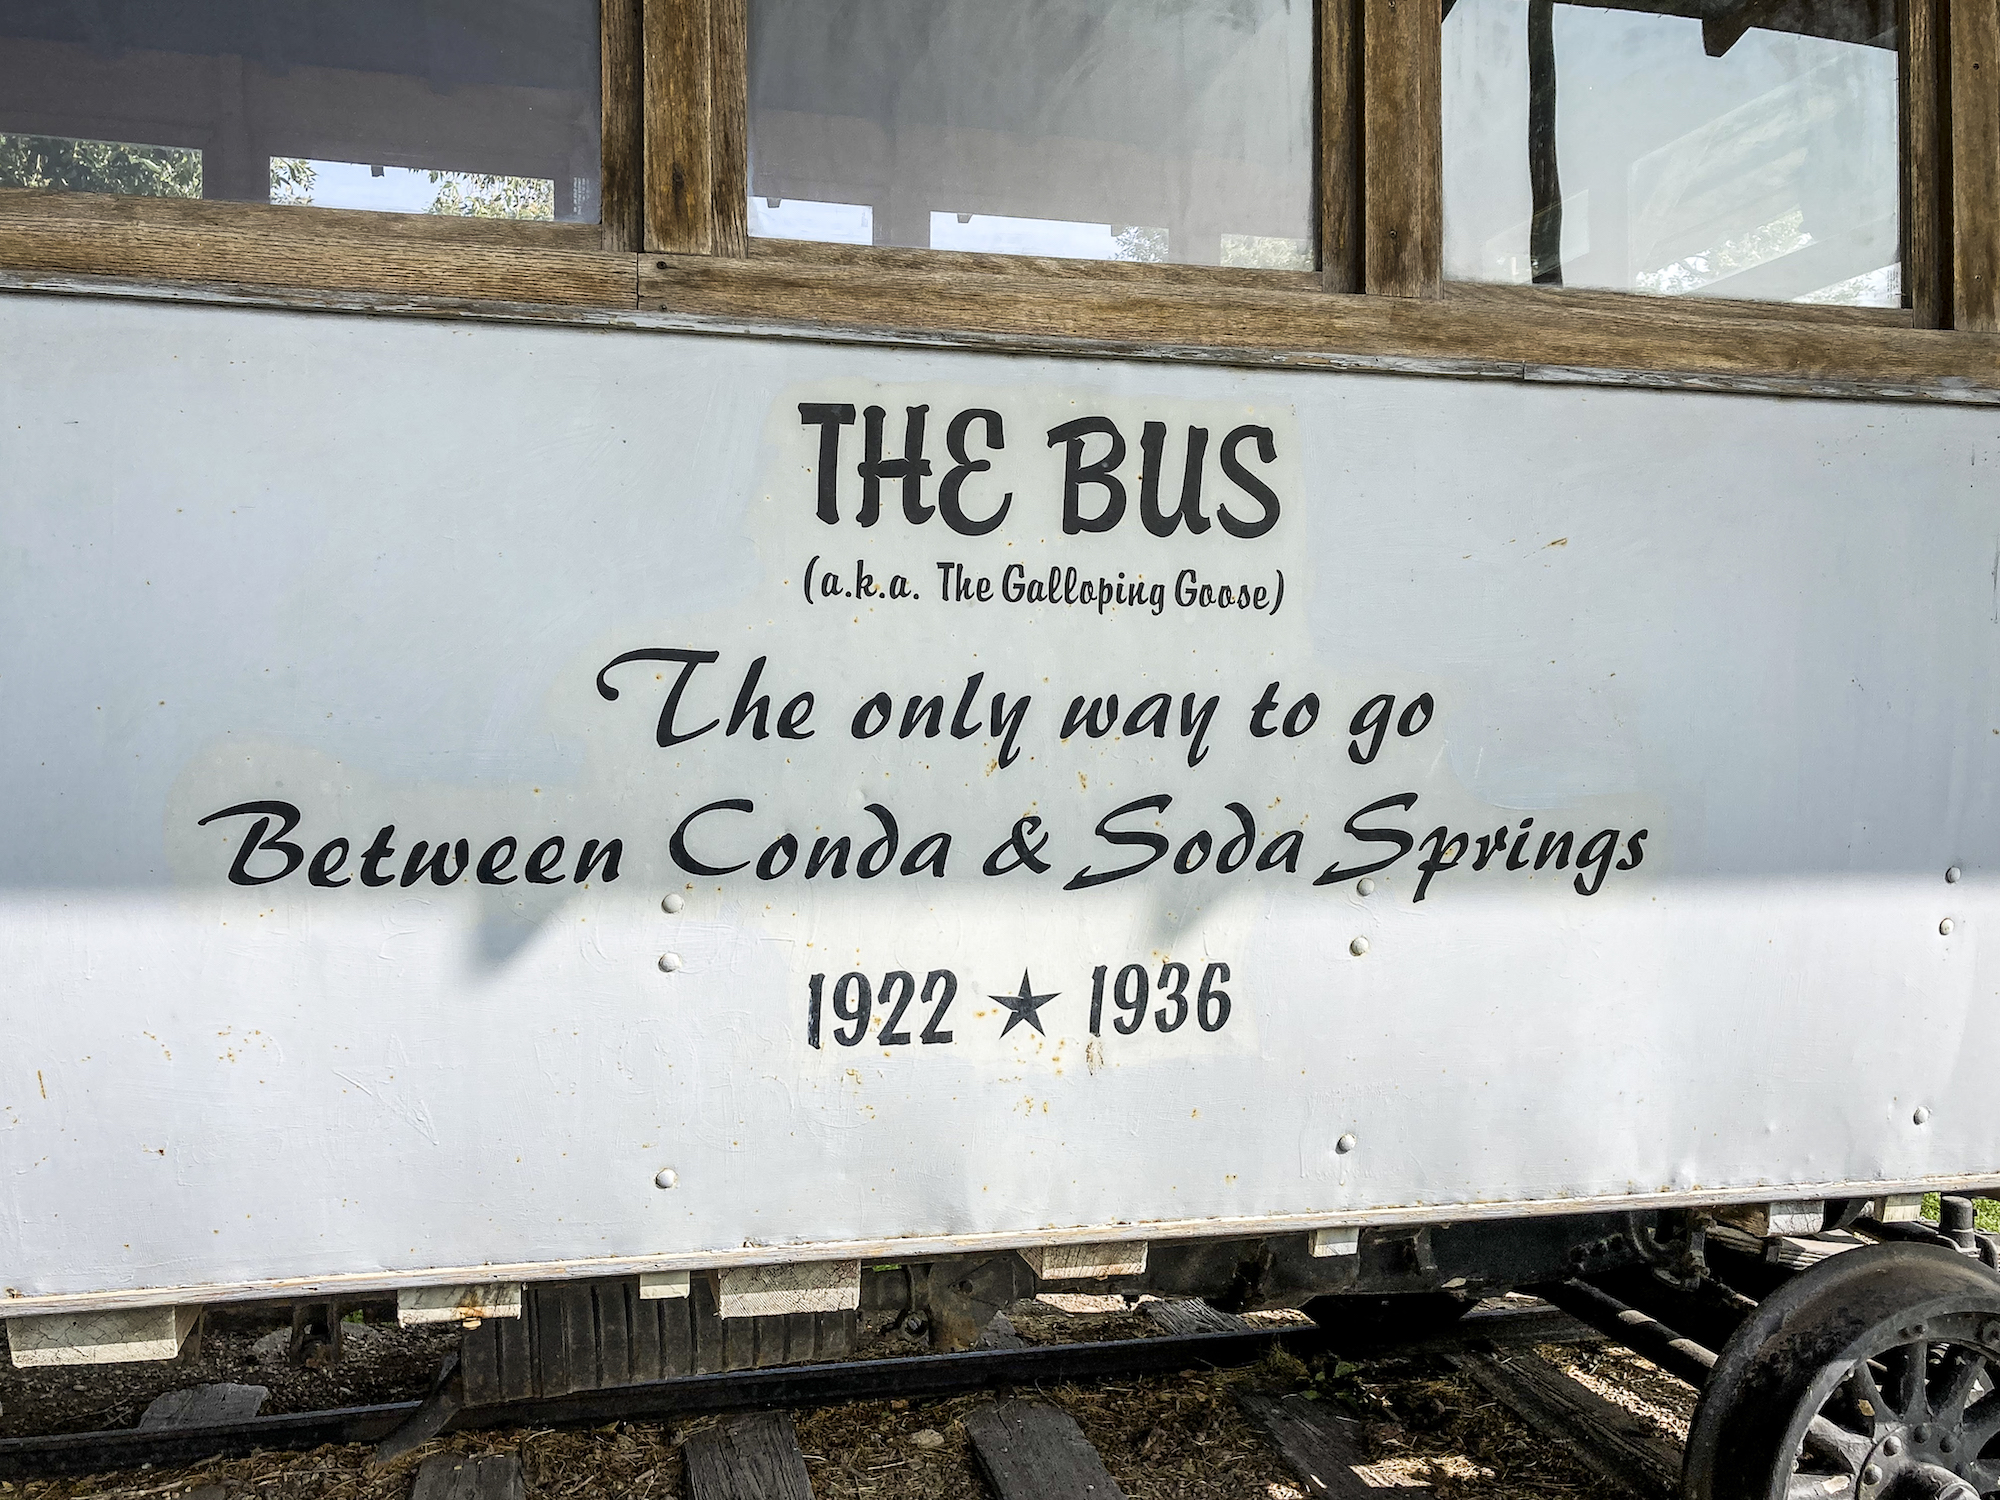 information on side of the bus in soda springs